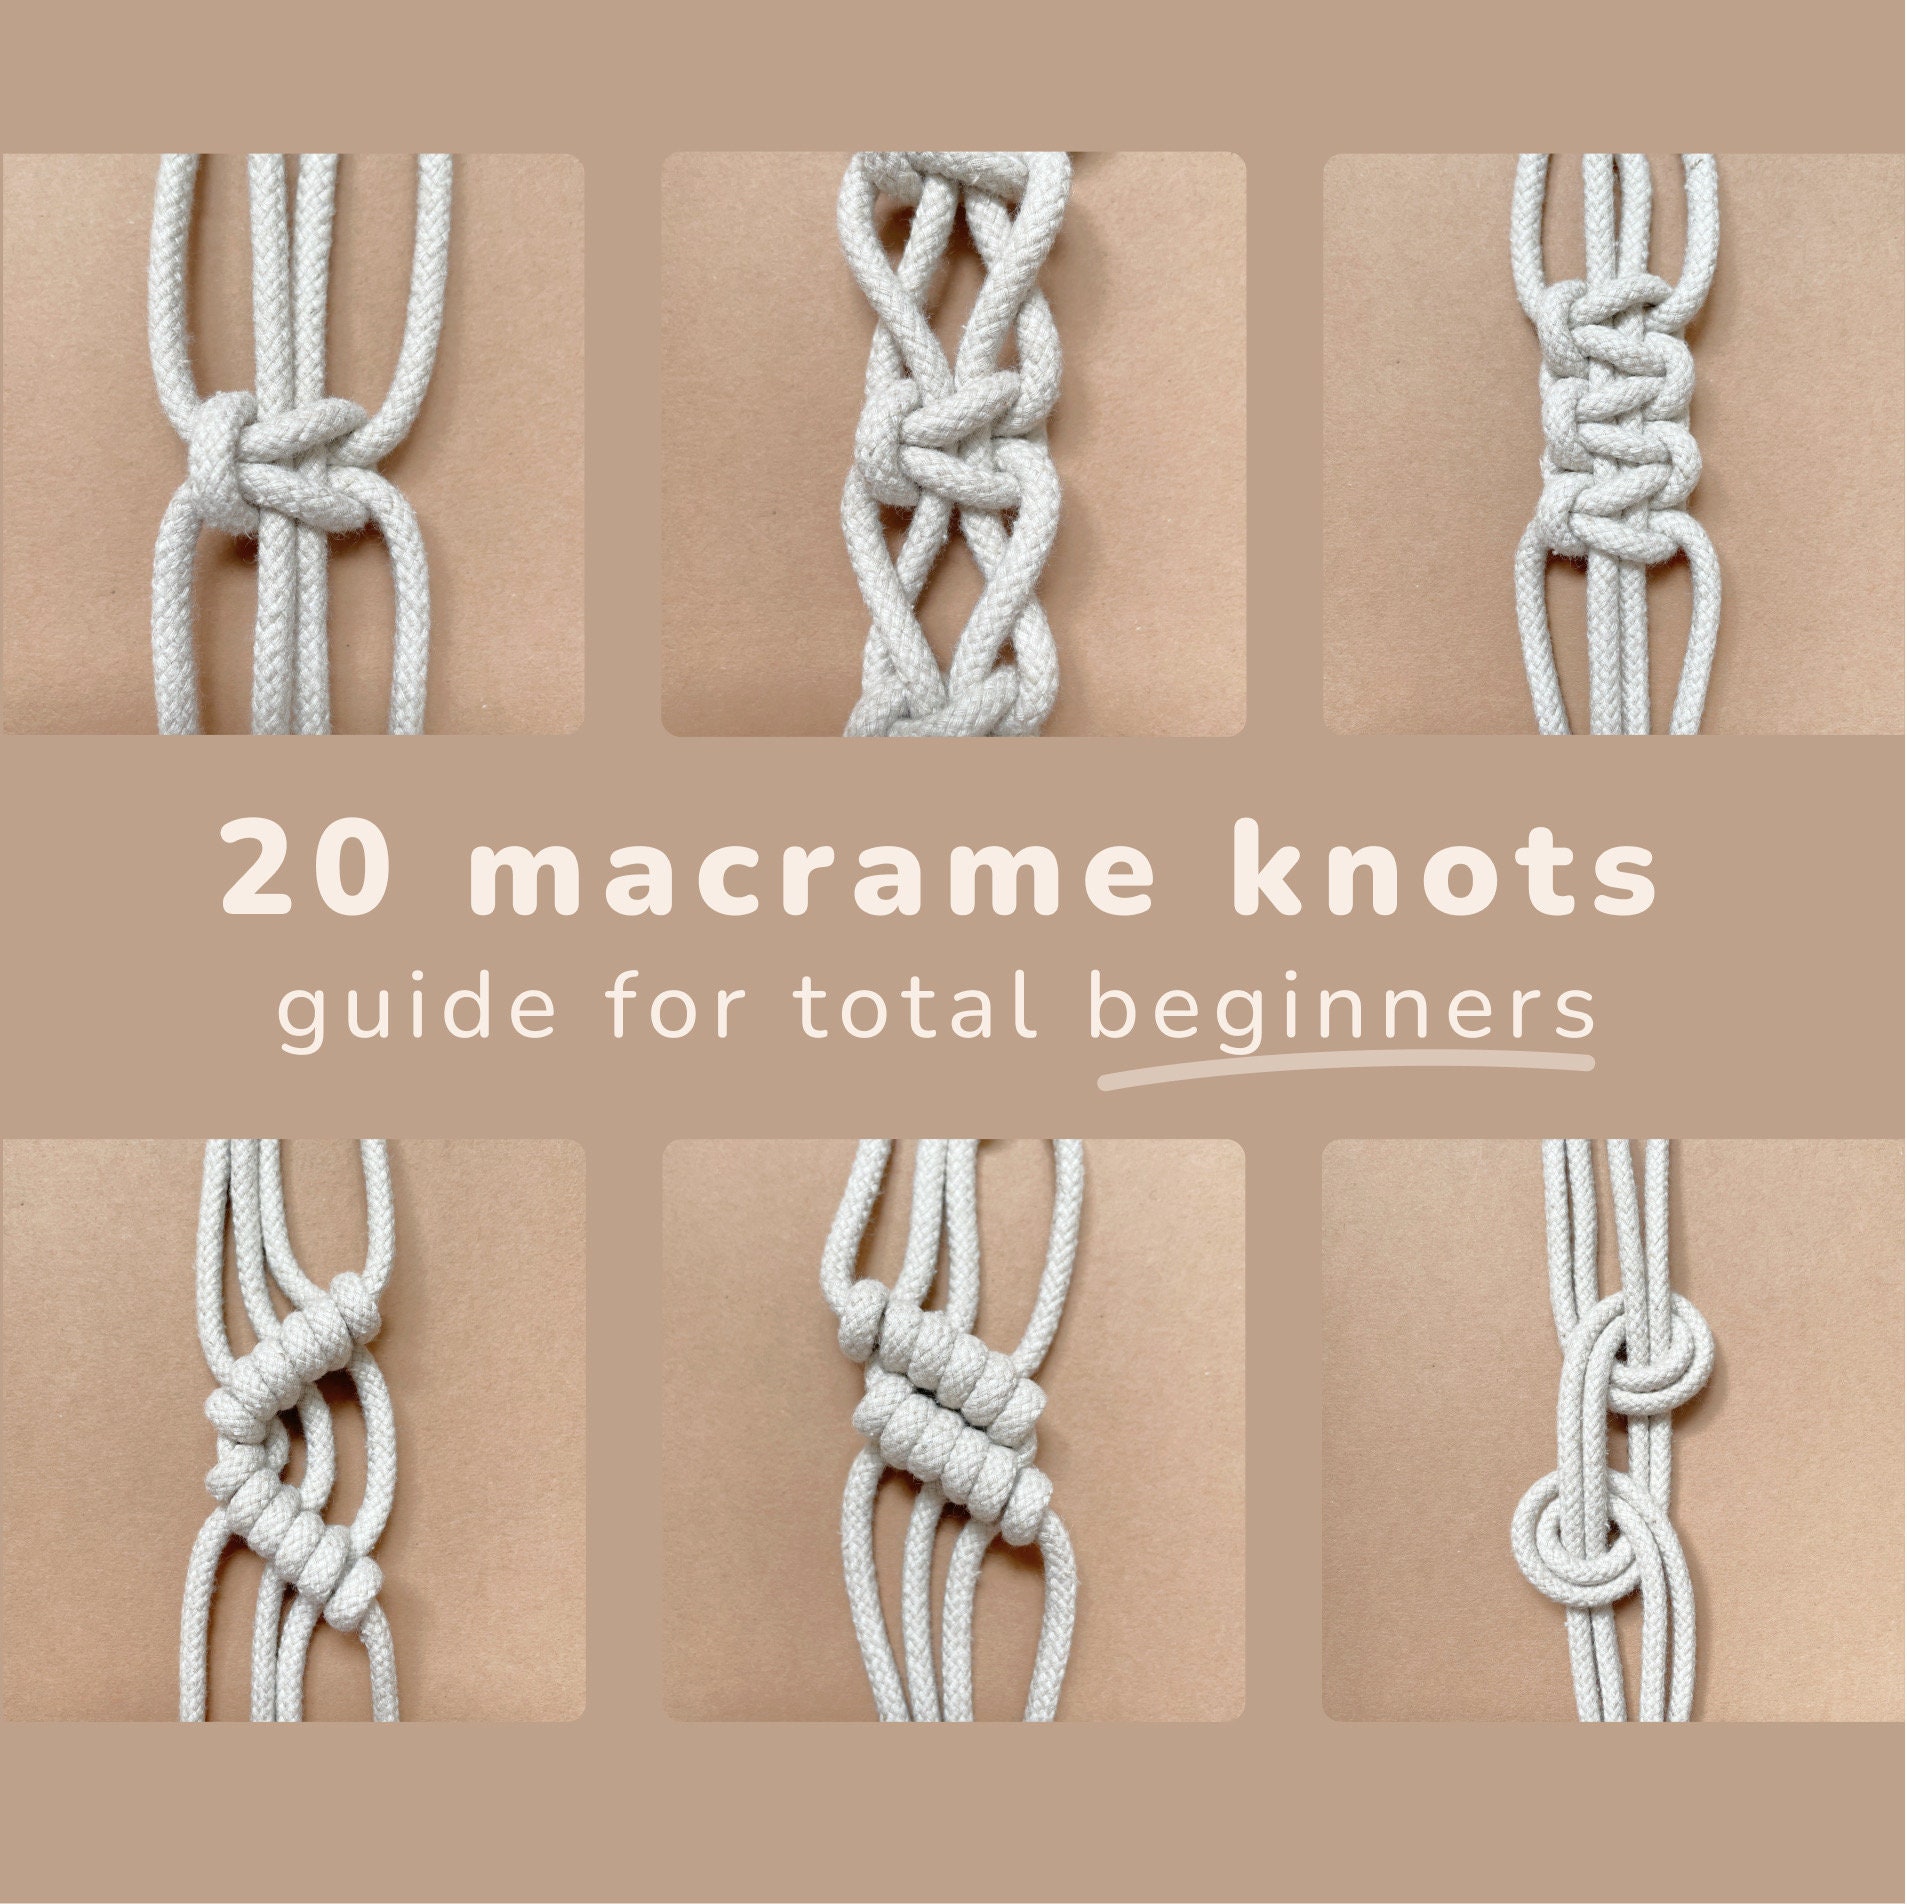 Macrame For Dummies: Complete Guide To Macrame Knots And Unique